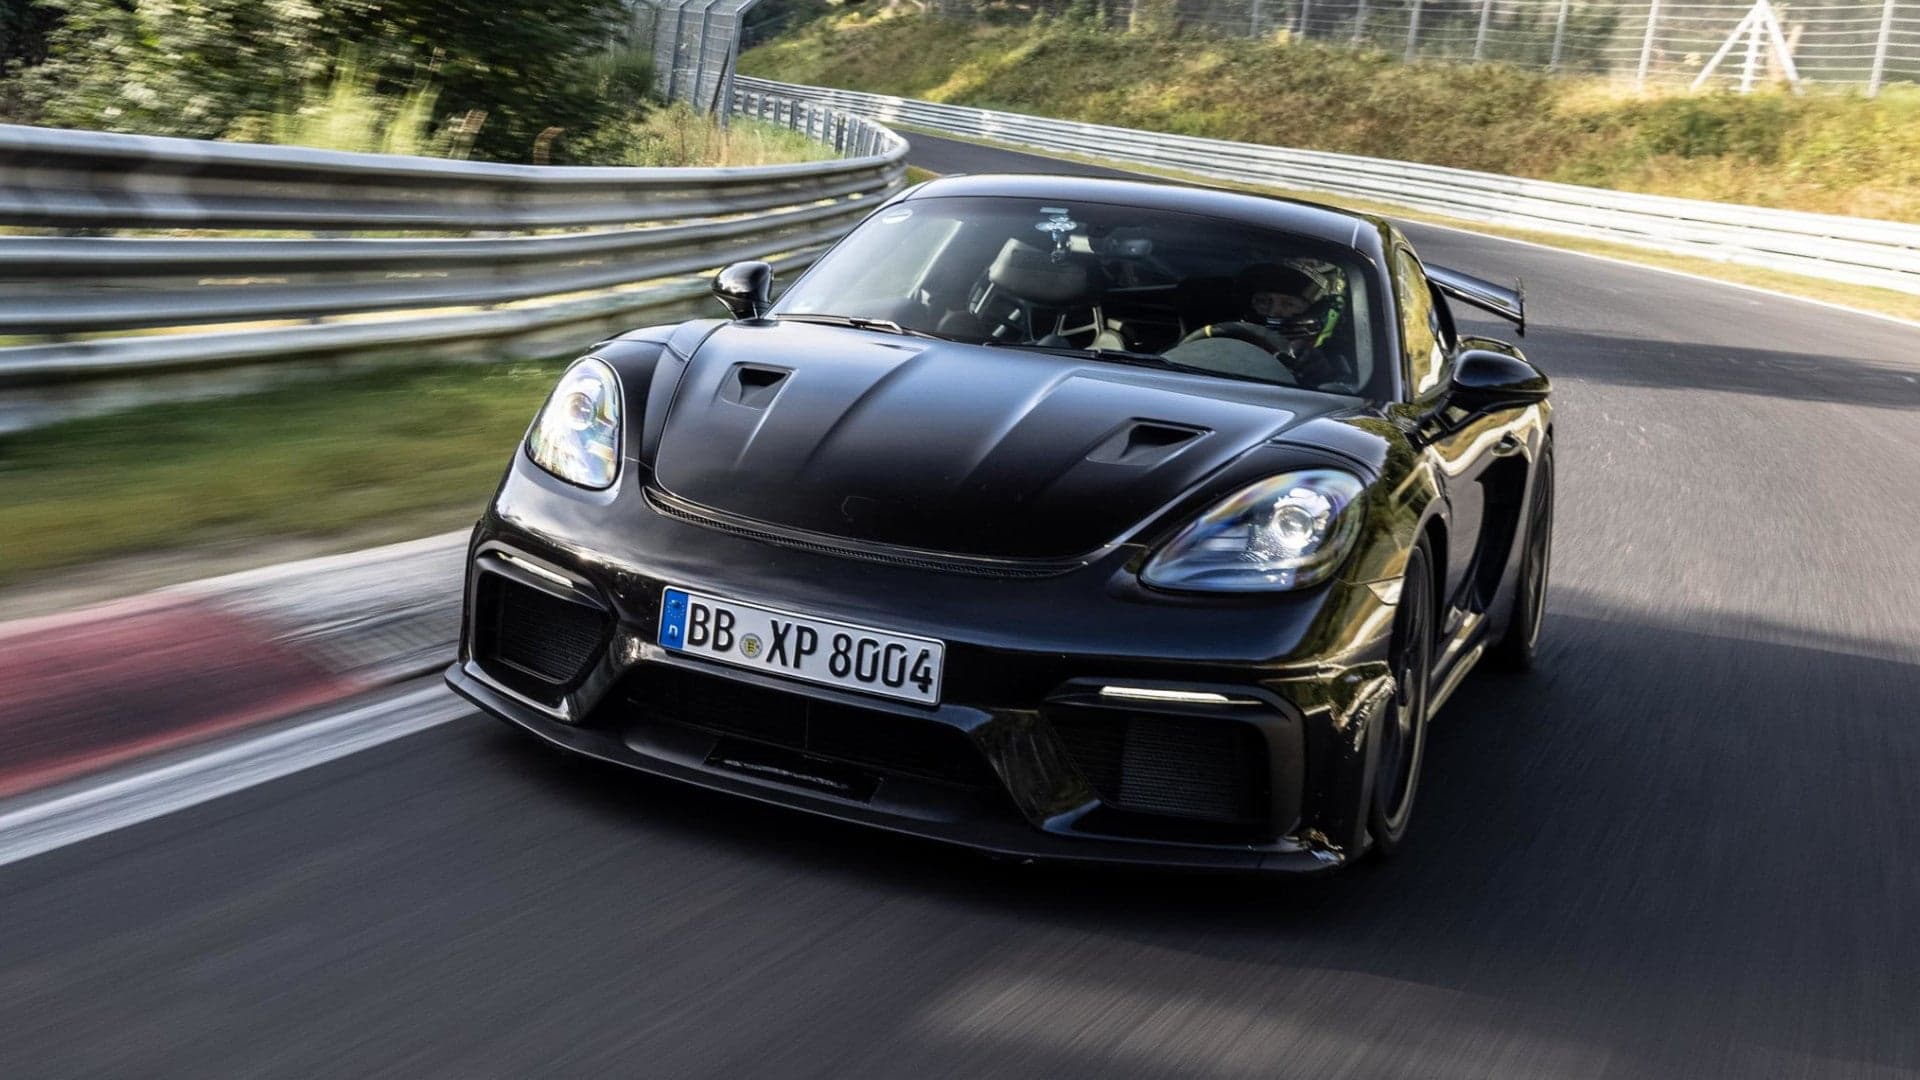 New Porsche 718 Cayman GT4 RS Laps Nurburgring Quicker Than Last 911 GT3